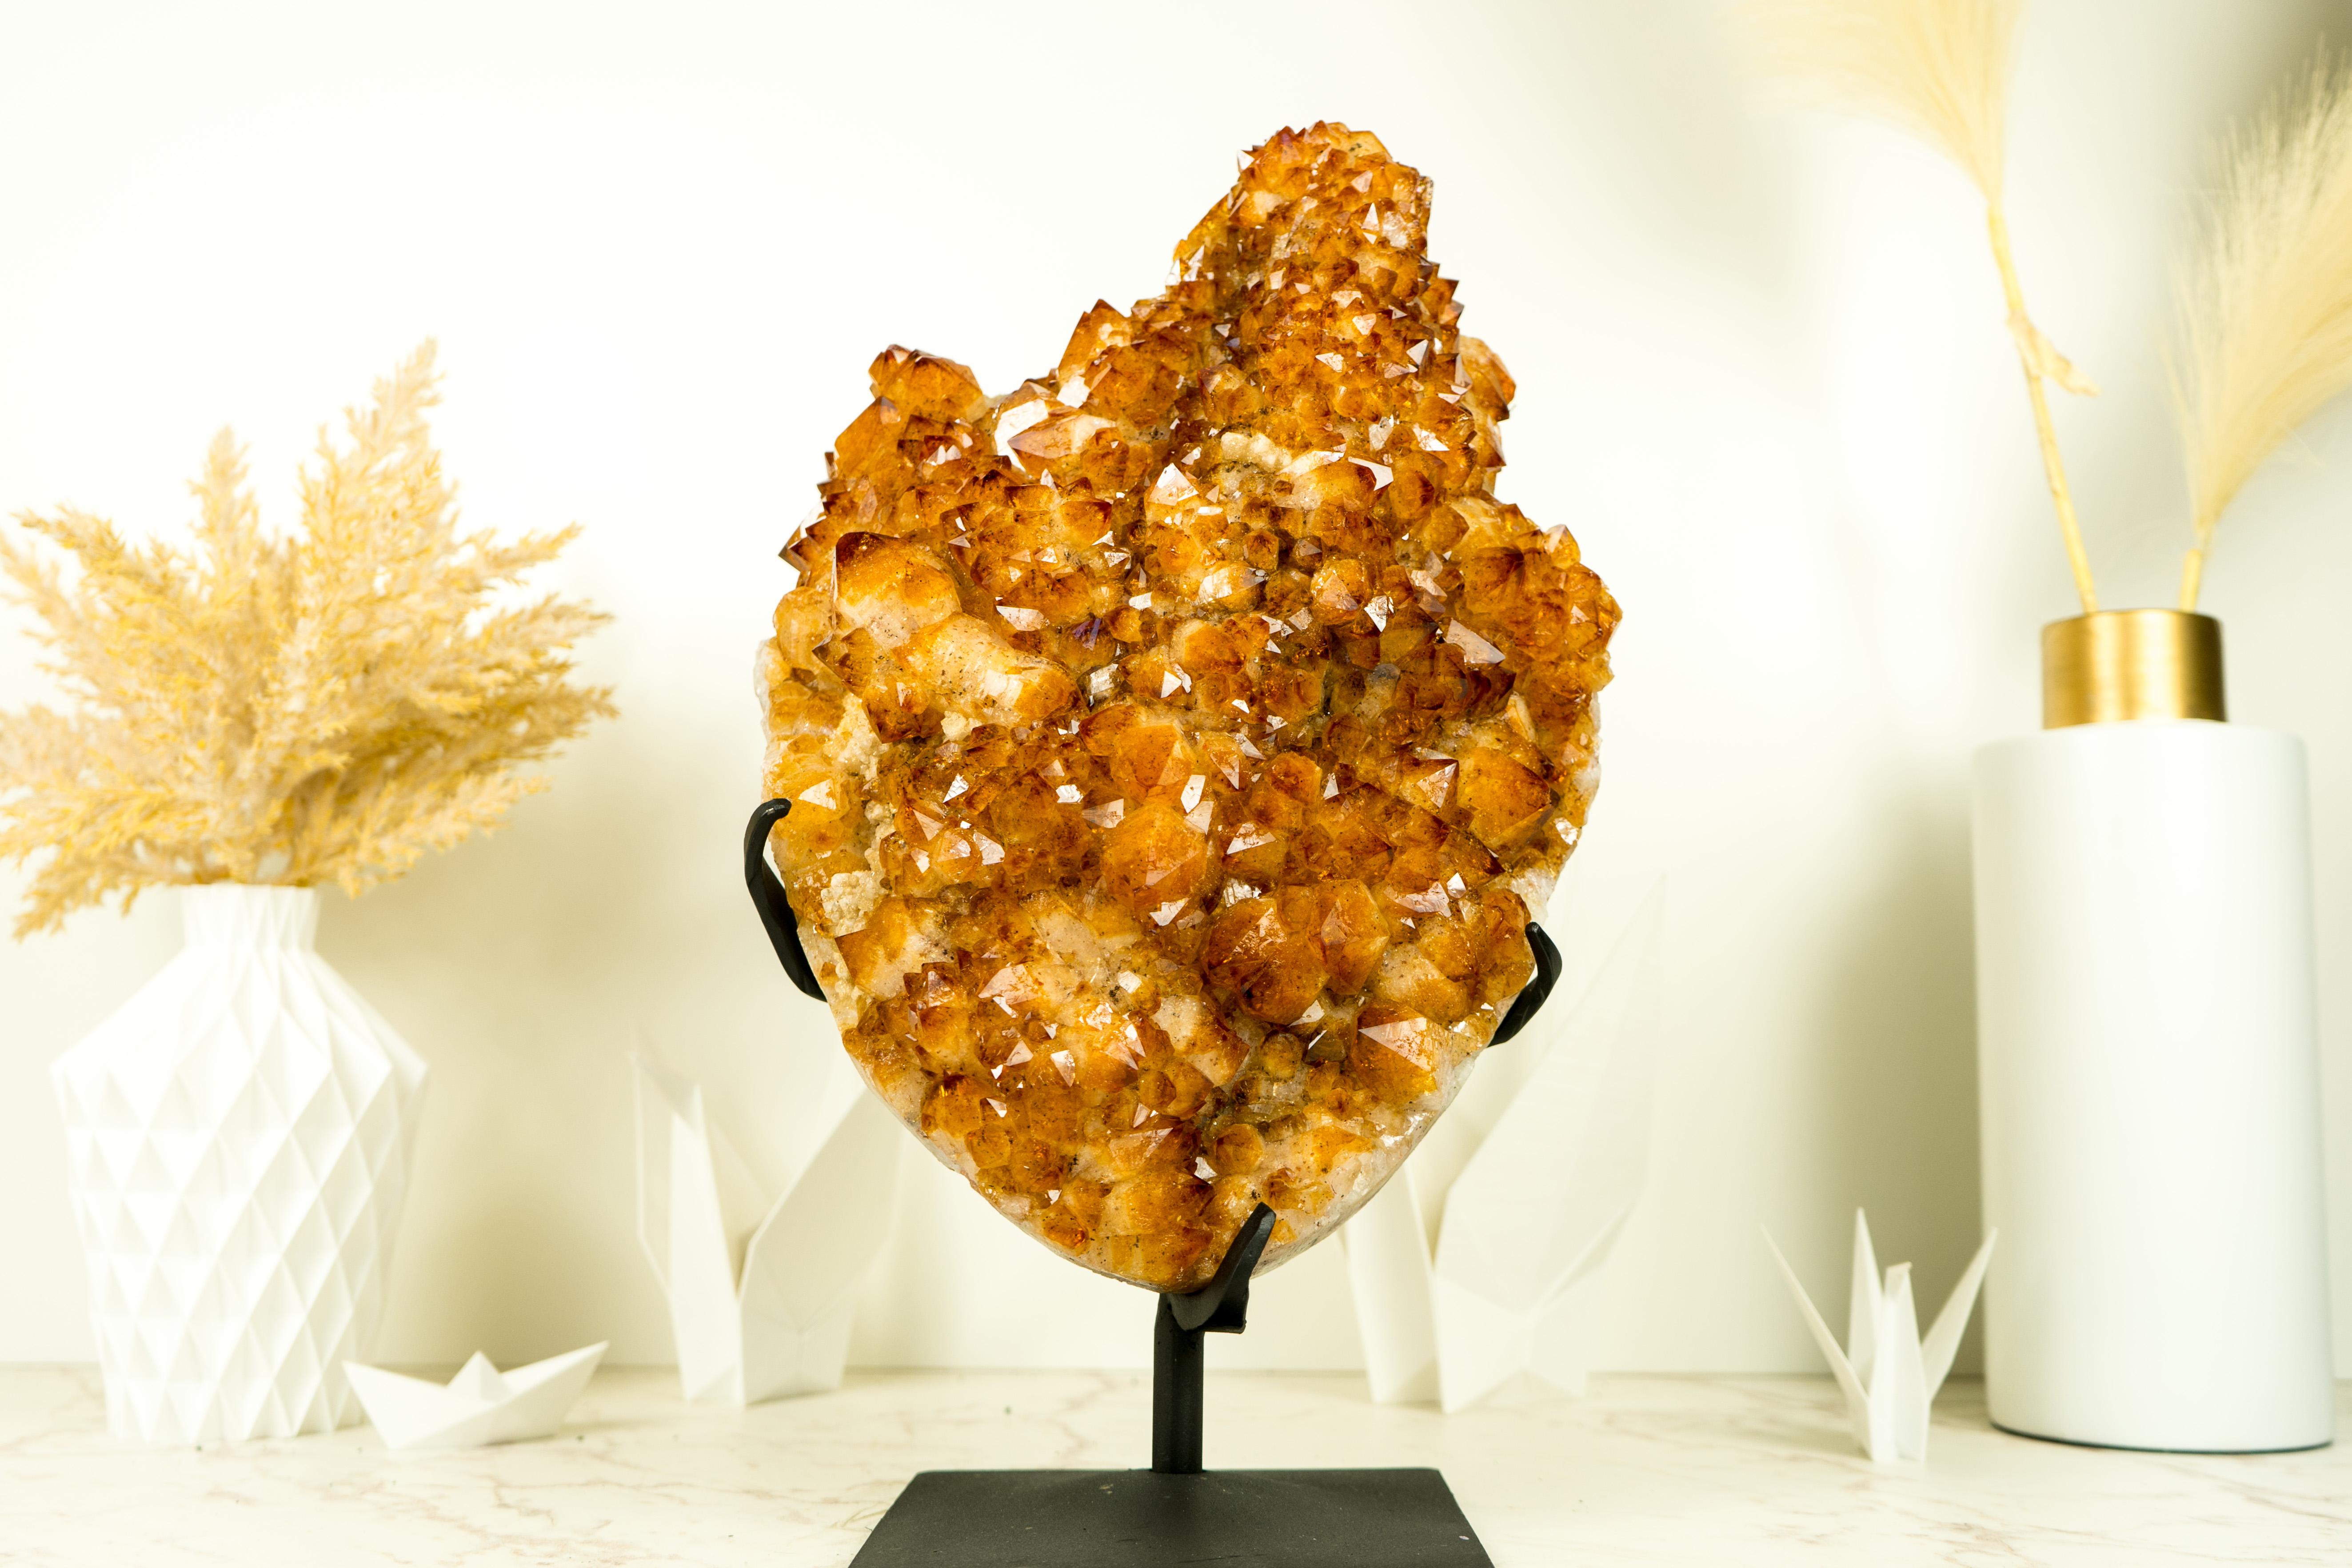 This extraordinary, tall Golden Orange Citrine Cluster was handpicked for its rare high-quality, and beautiful aesthetics. A unique citrine flower specimen that showcases the creativity of nature, making it an extraordinary addition to any